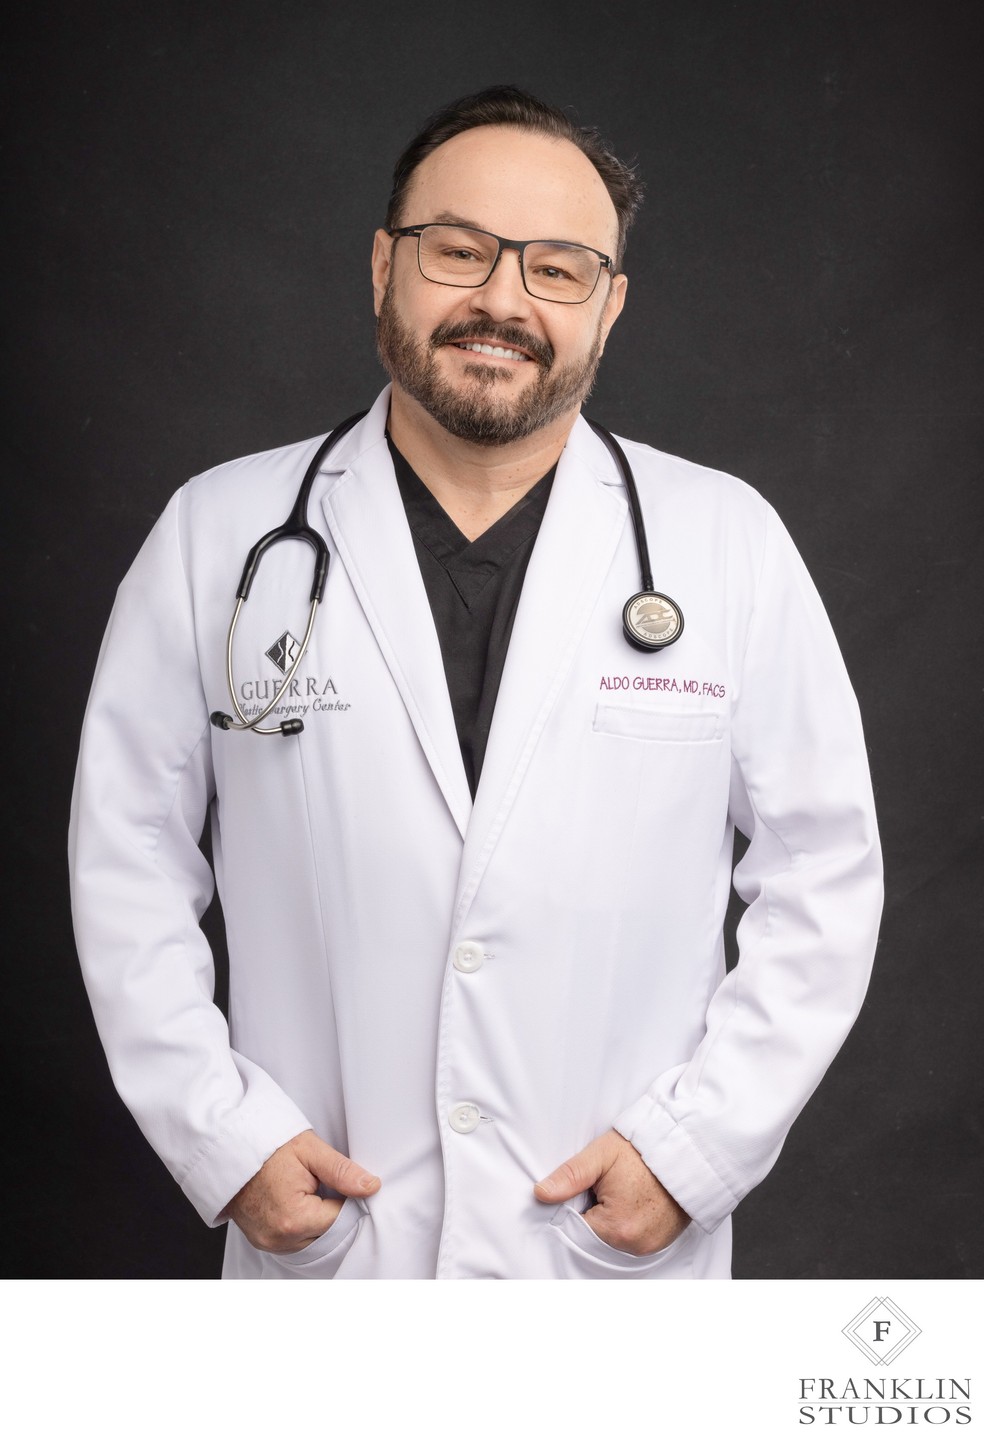 Headshots for Medical Professionals